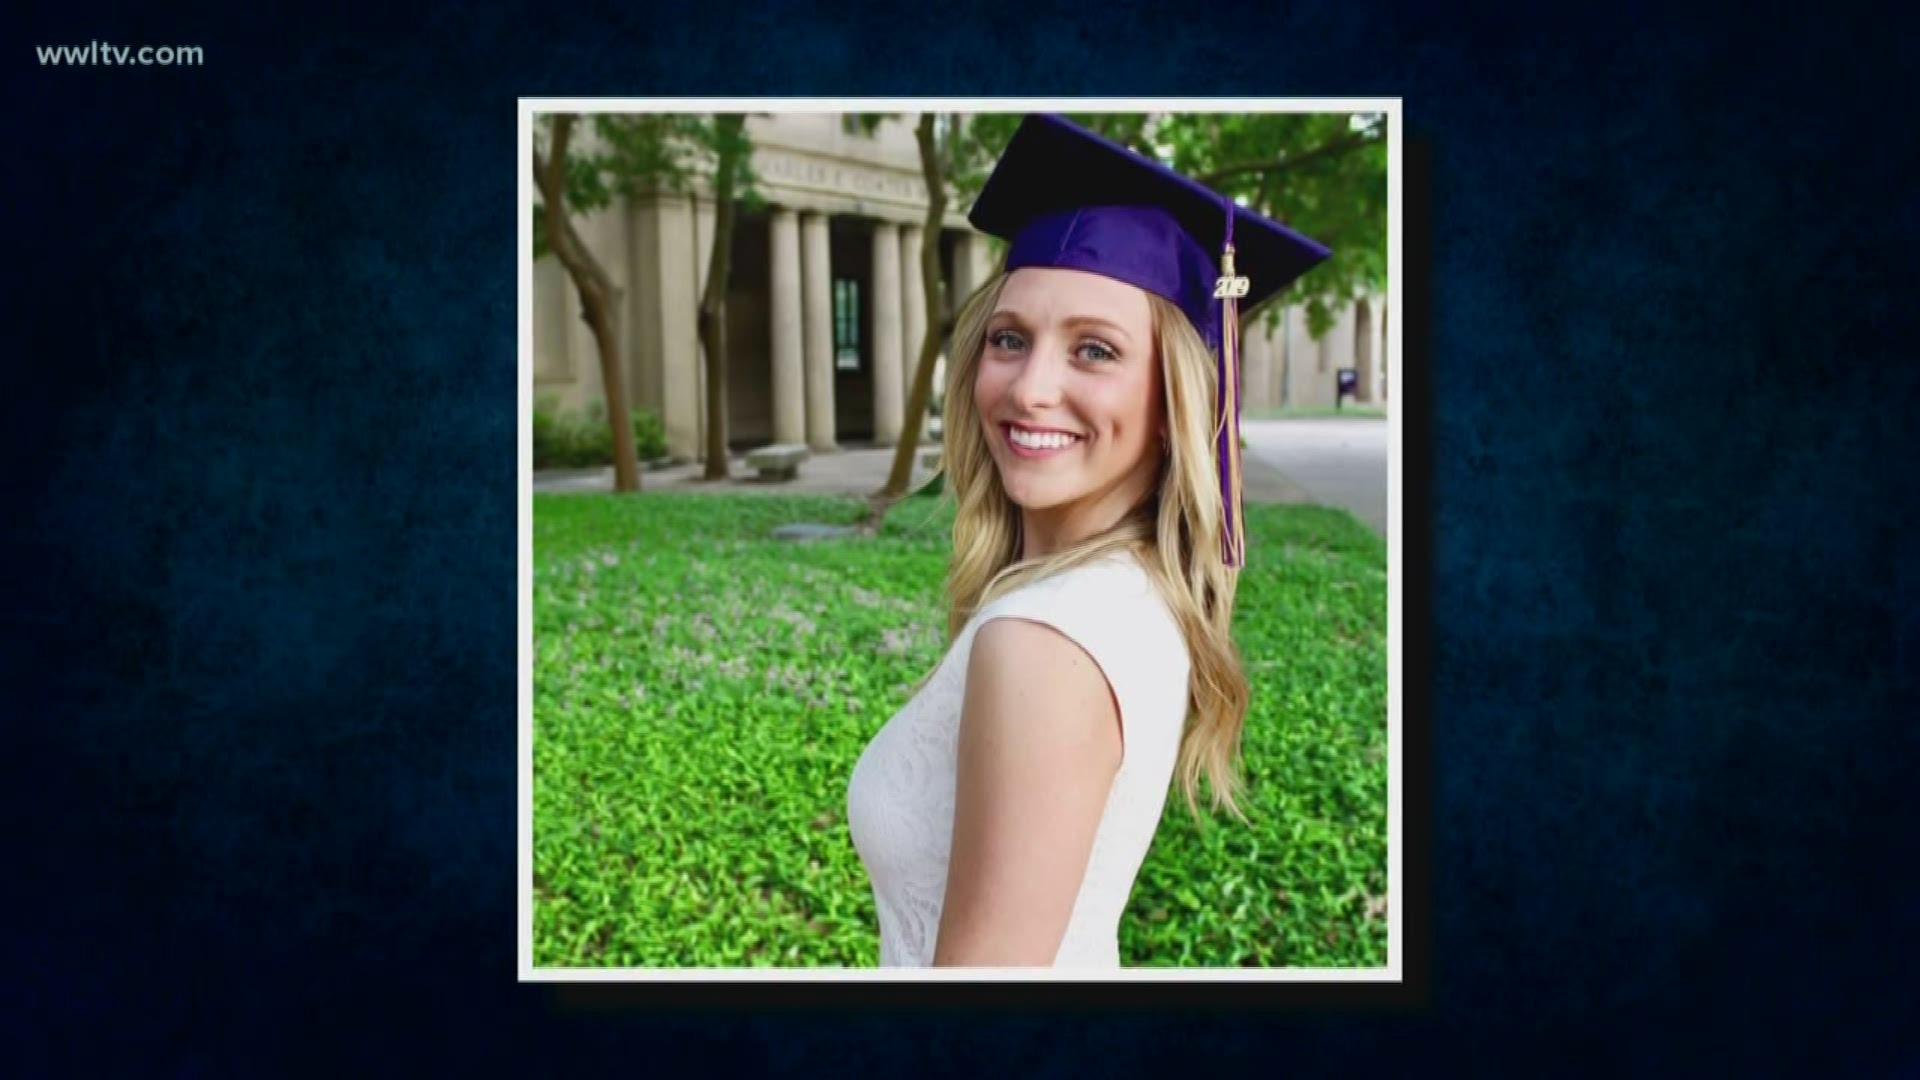 LSU and Phi Mu sorority identified the victims as Jillian Clark, Kameron Cline and Brittney Searson as three of the seven victims. All graduated in May 2019.